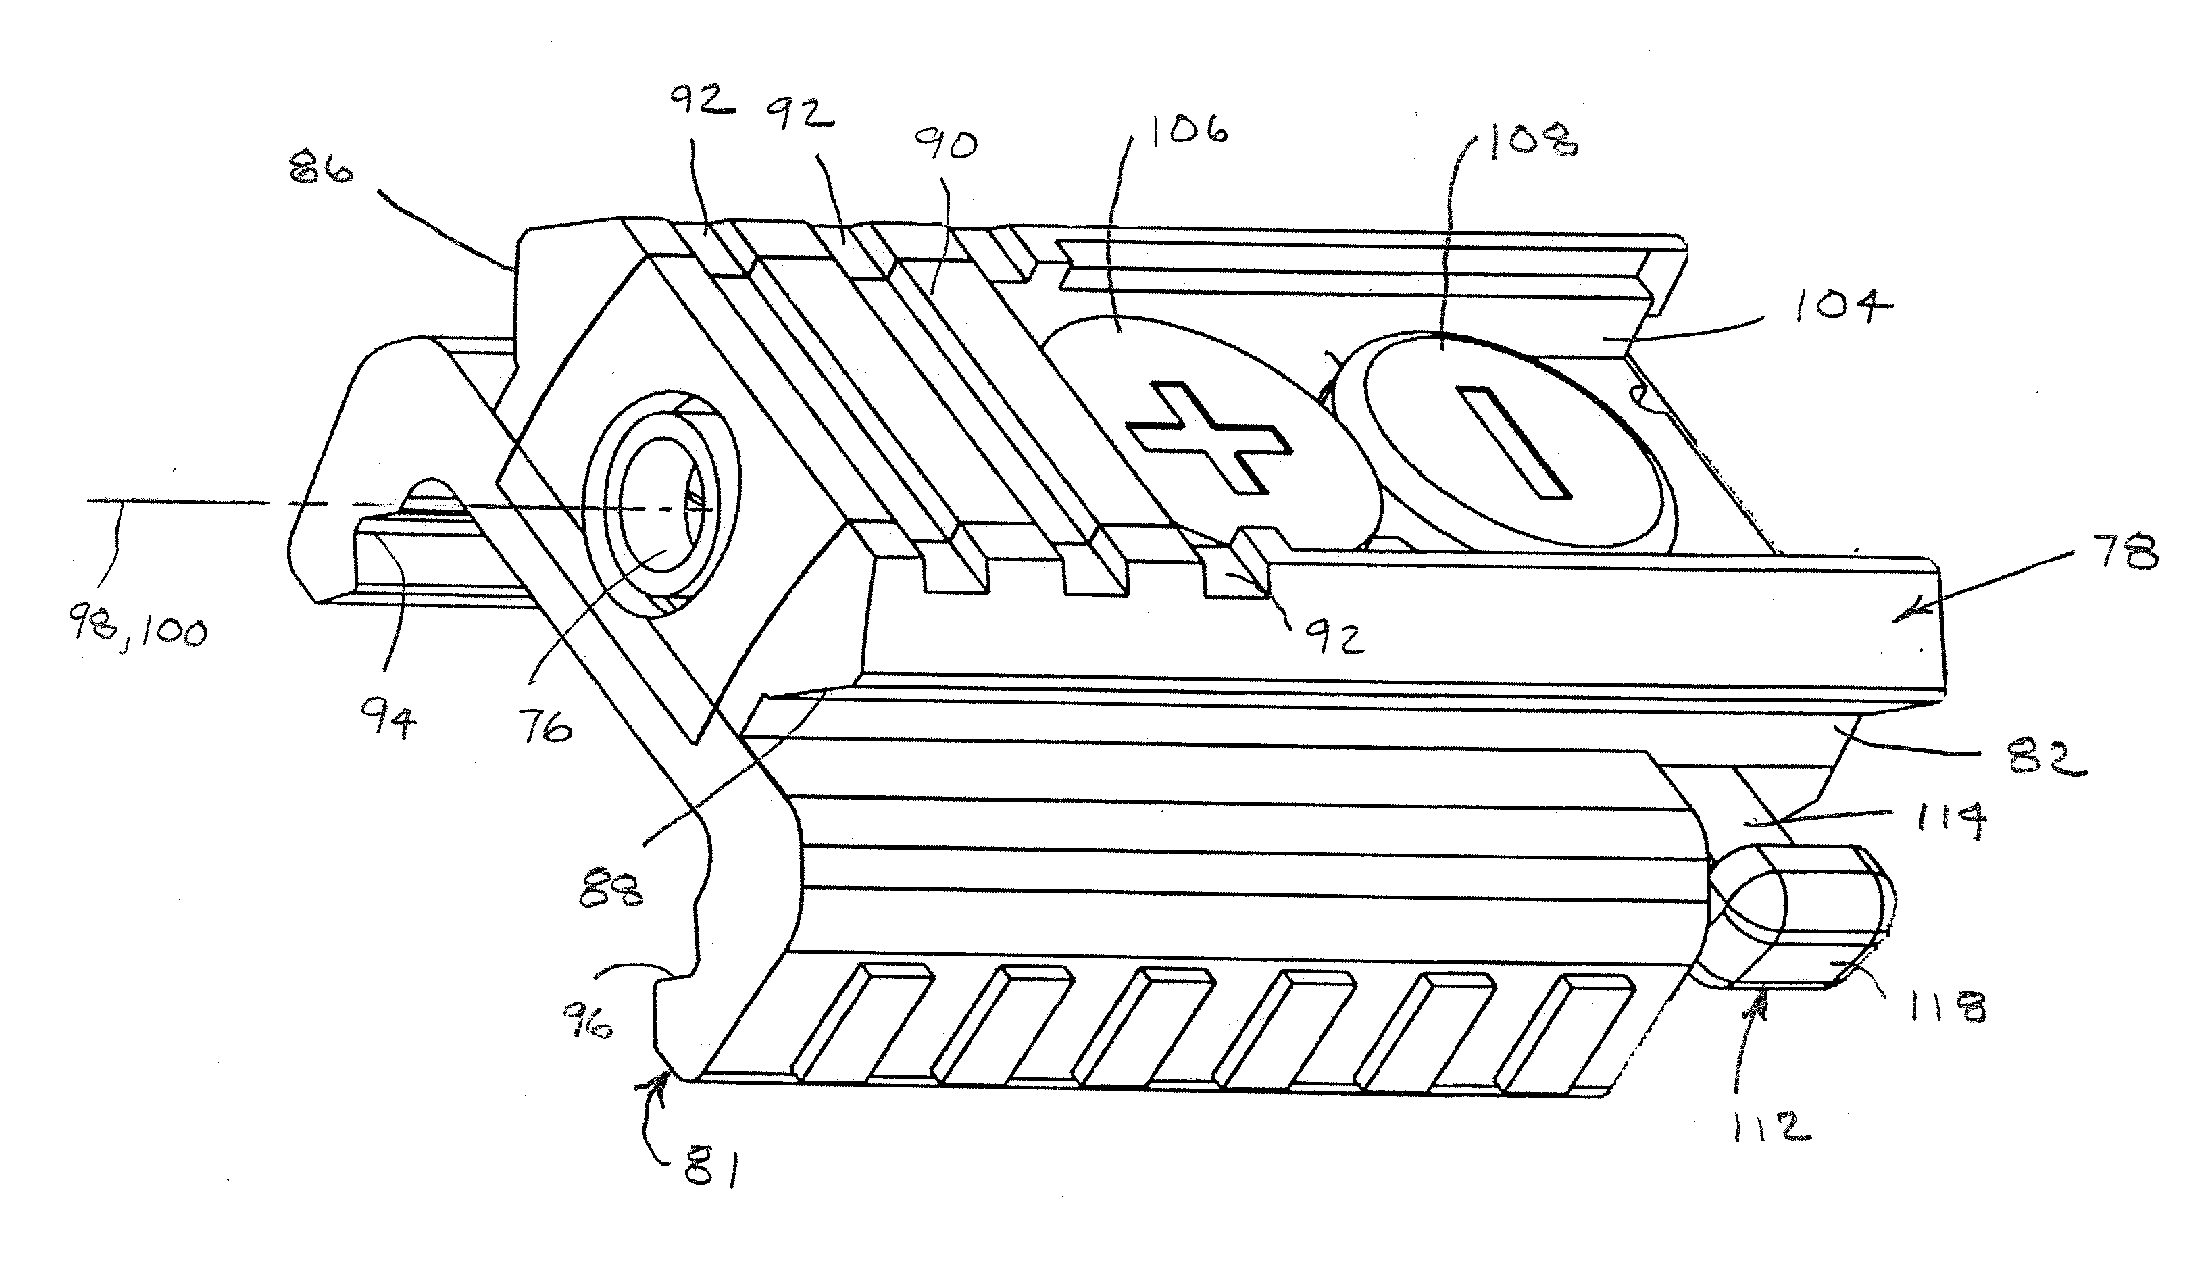 Firearm Mount with Embedded Laser Sight